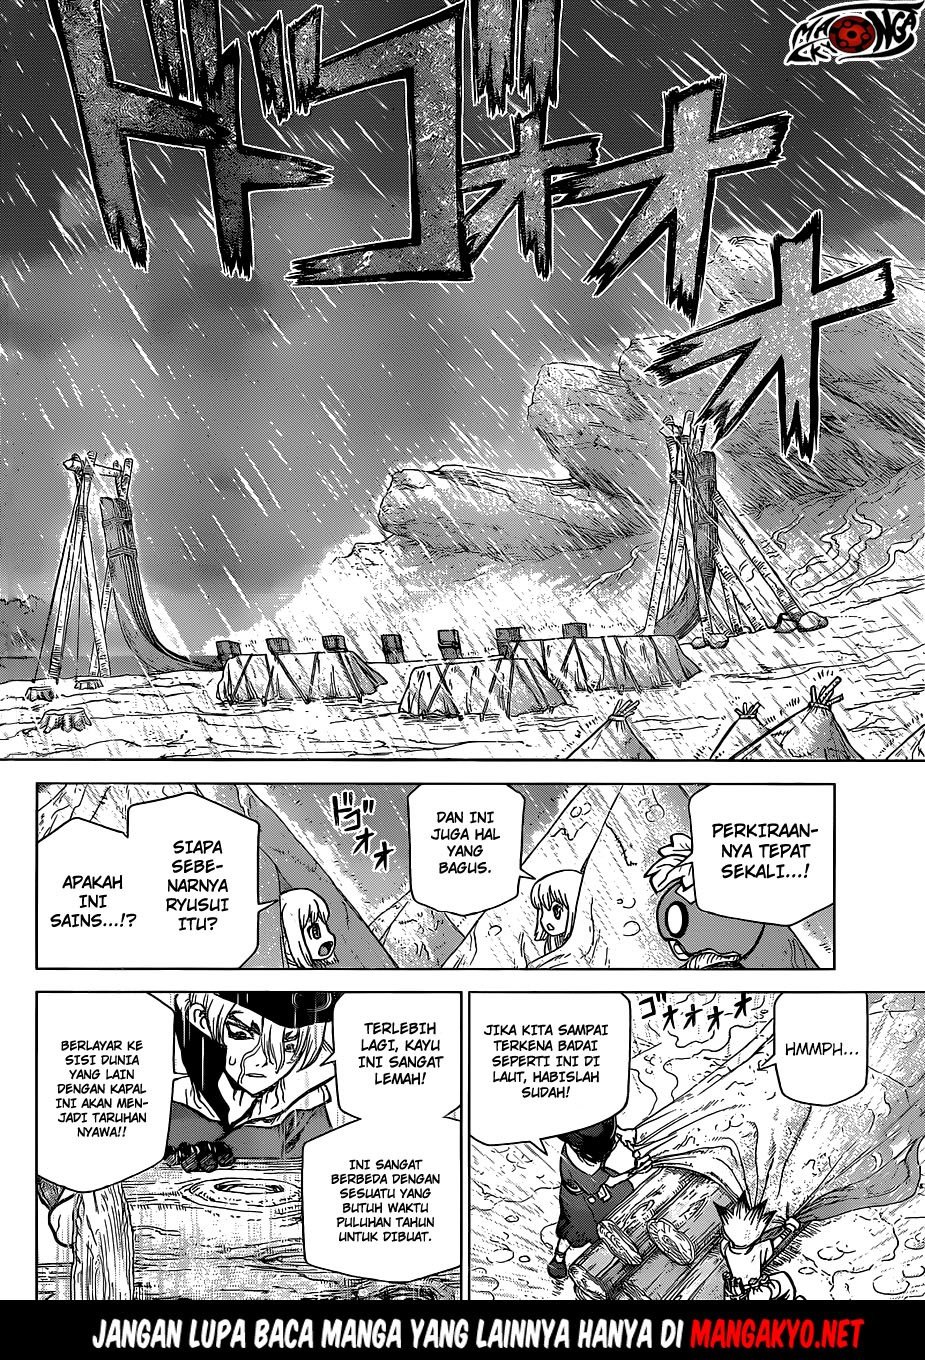 Dr Stone Chapter 85